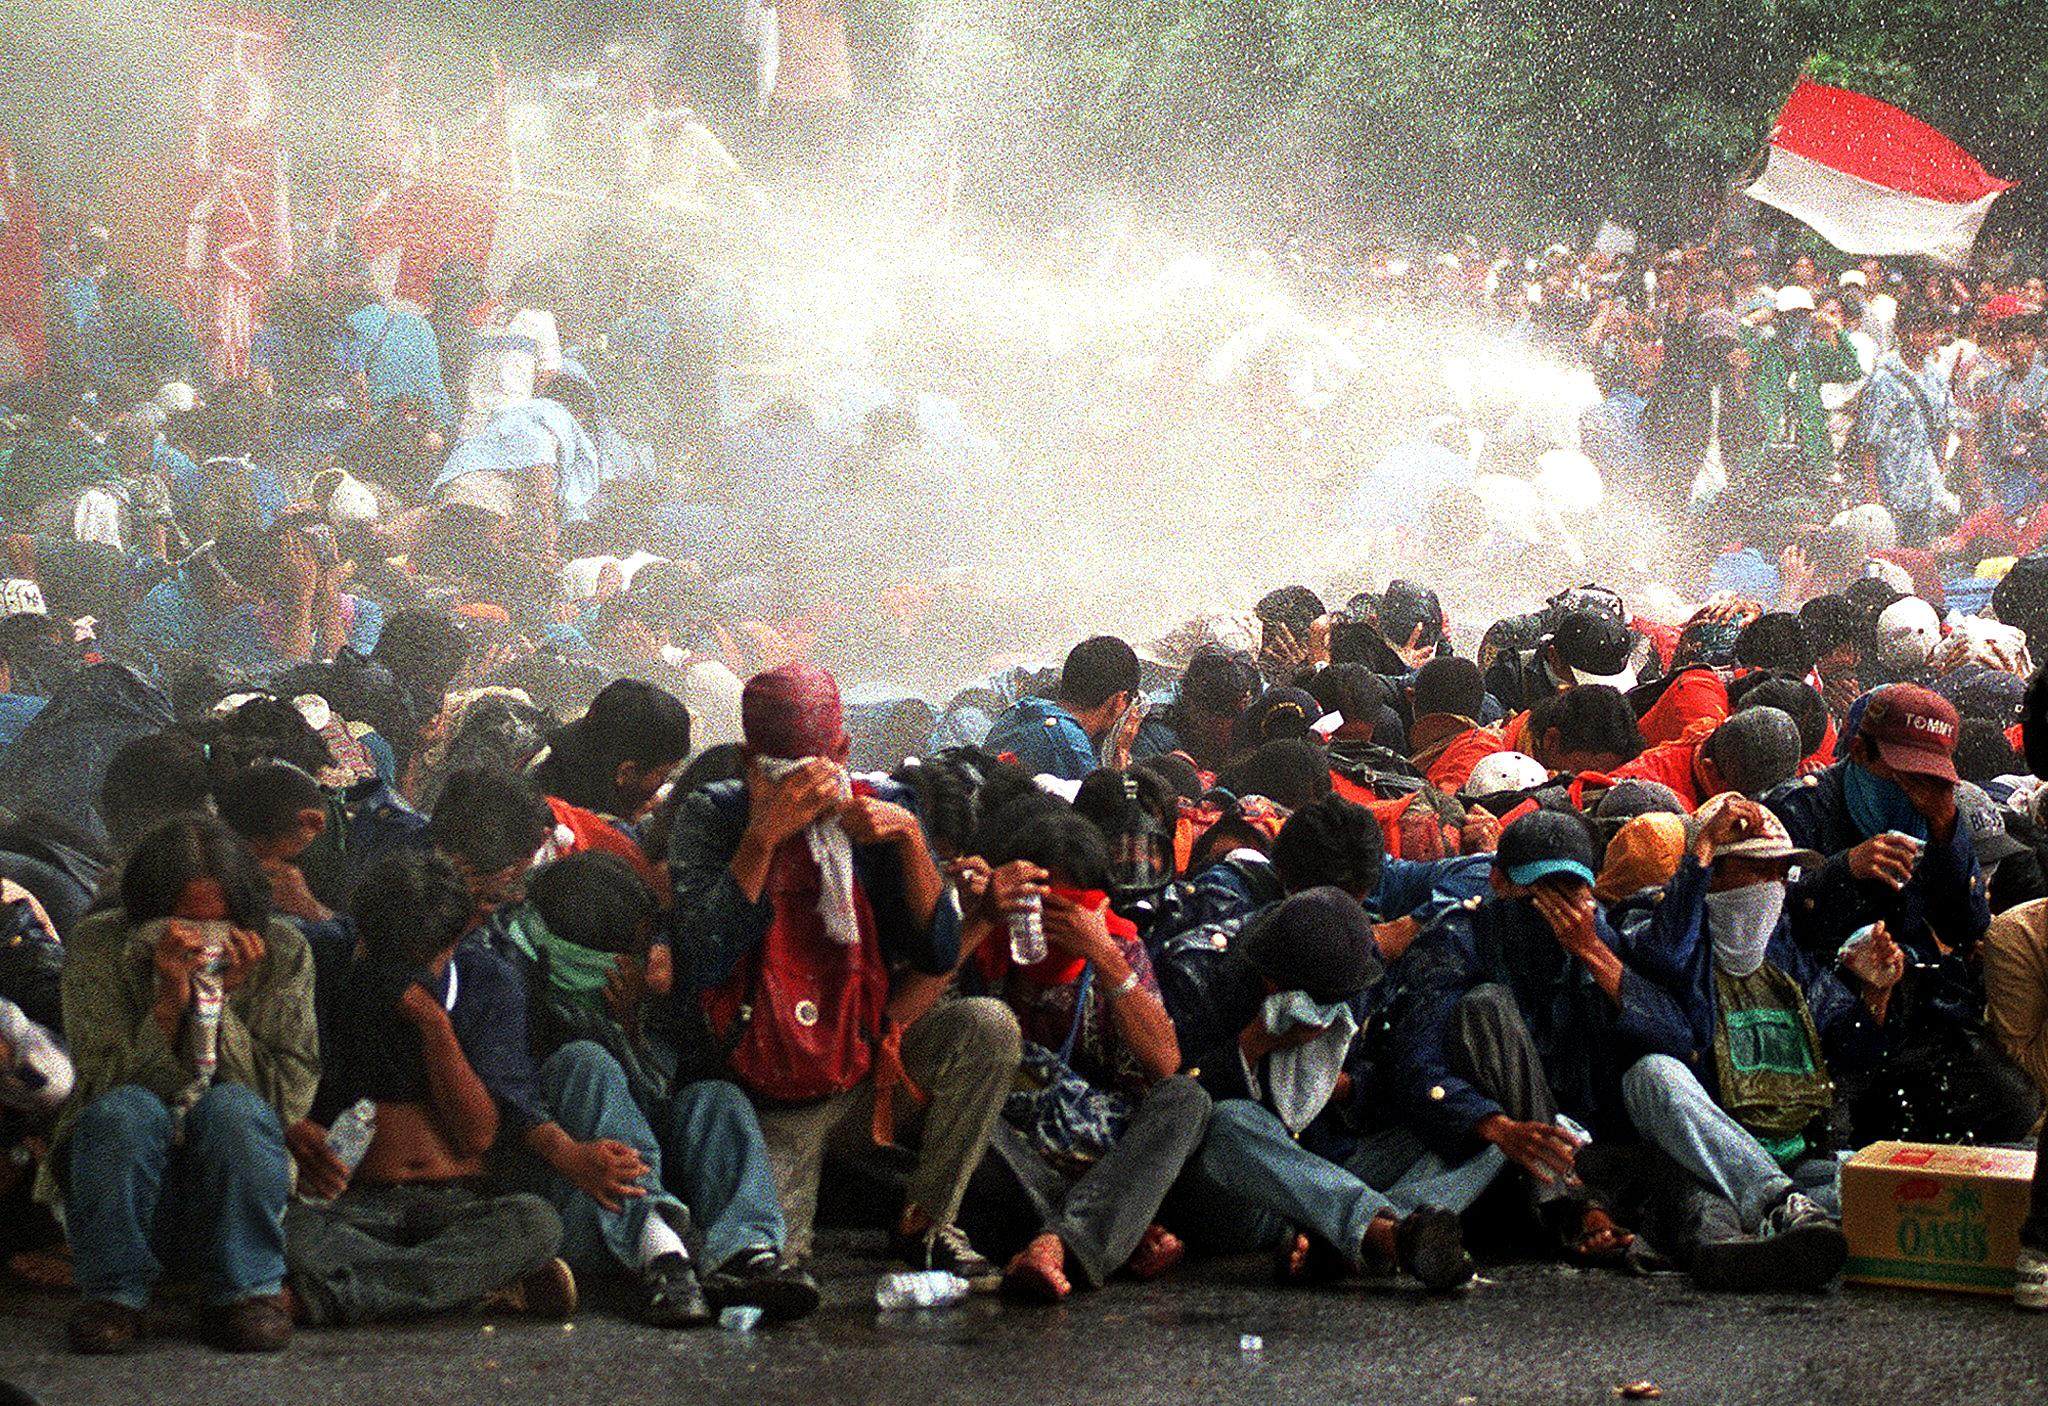 Indonesian security forces fire a water cannon at university students during a protest in Jakarta in November 1998. Photo: AFP